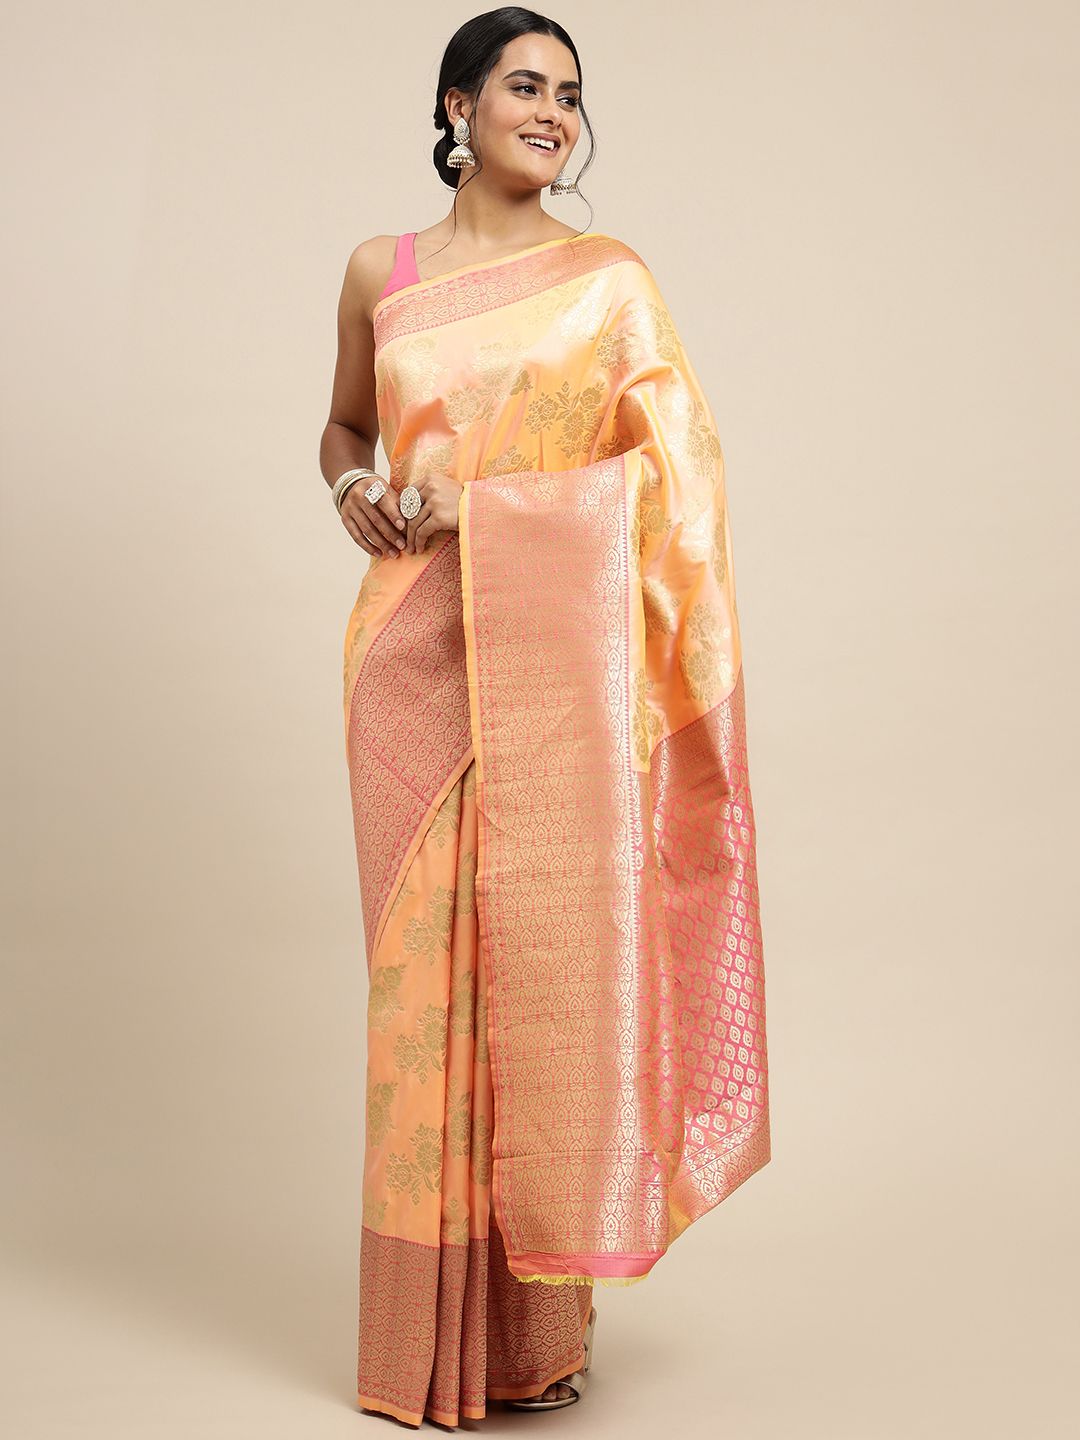 White Color Exquisite Silk Sarees for Every Occasion